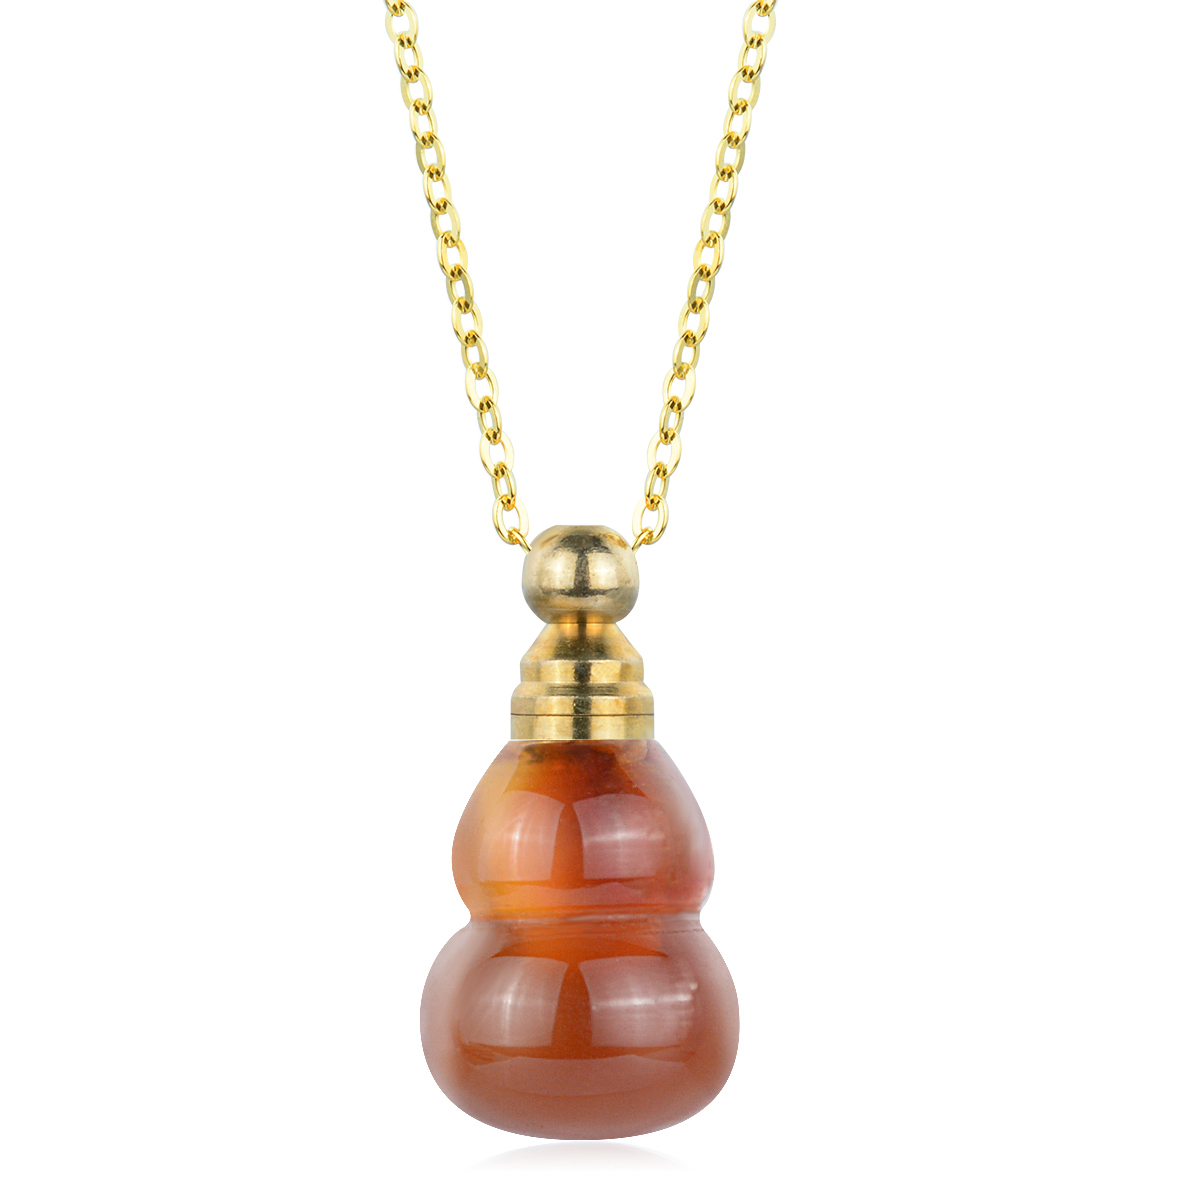 Merryshine Jewelry Gourd Shape Agate color Natural Crystal Stone Perfume Essential Oil Bottle Pendant Necklace